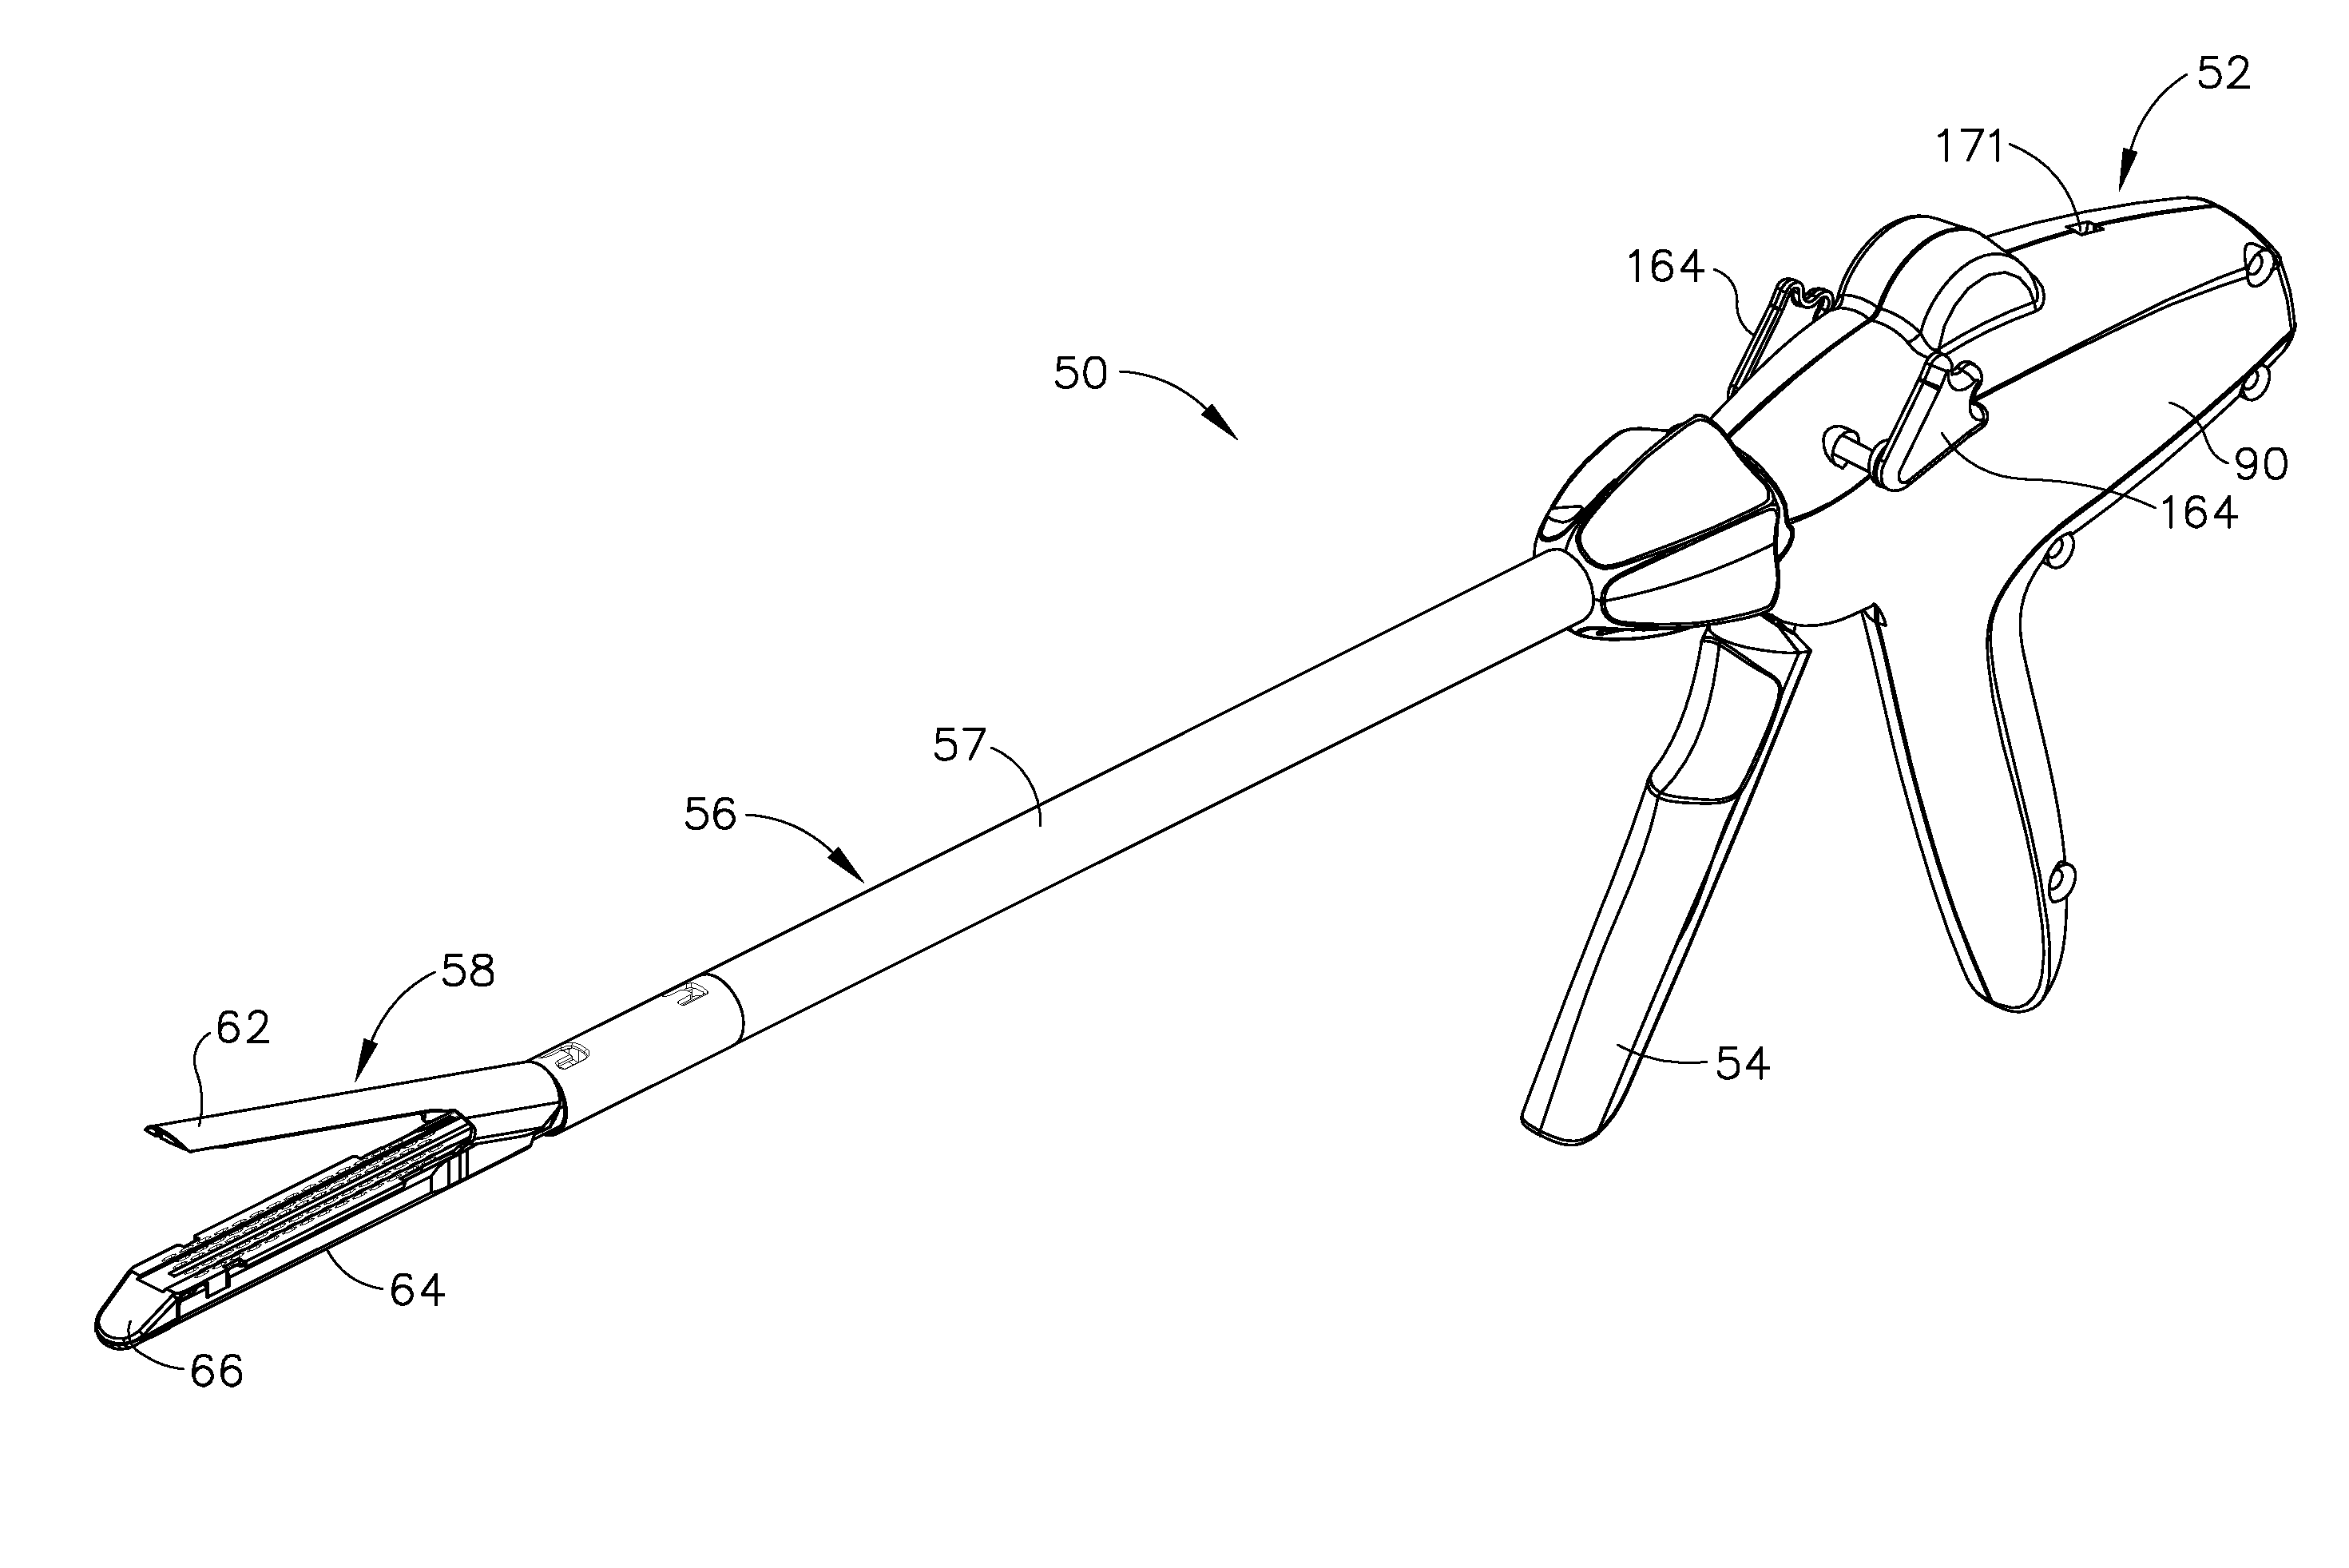 Surgical instrument having a multiple rate directional switching mechanism